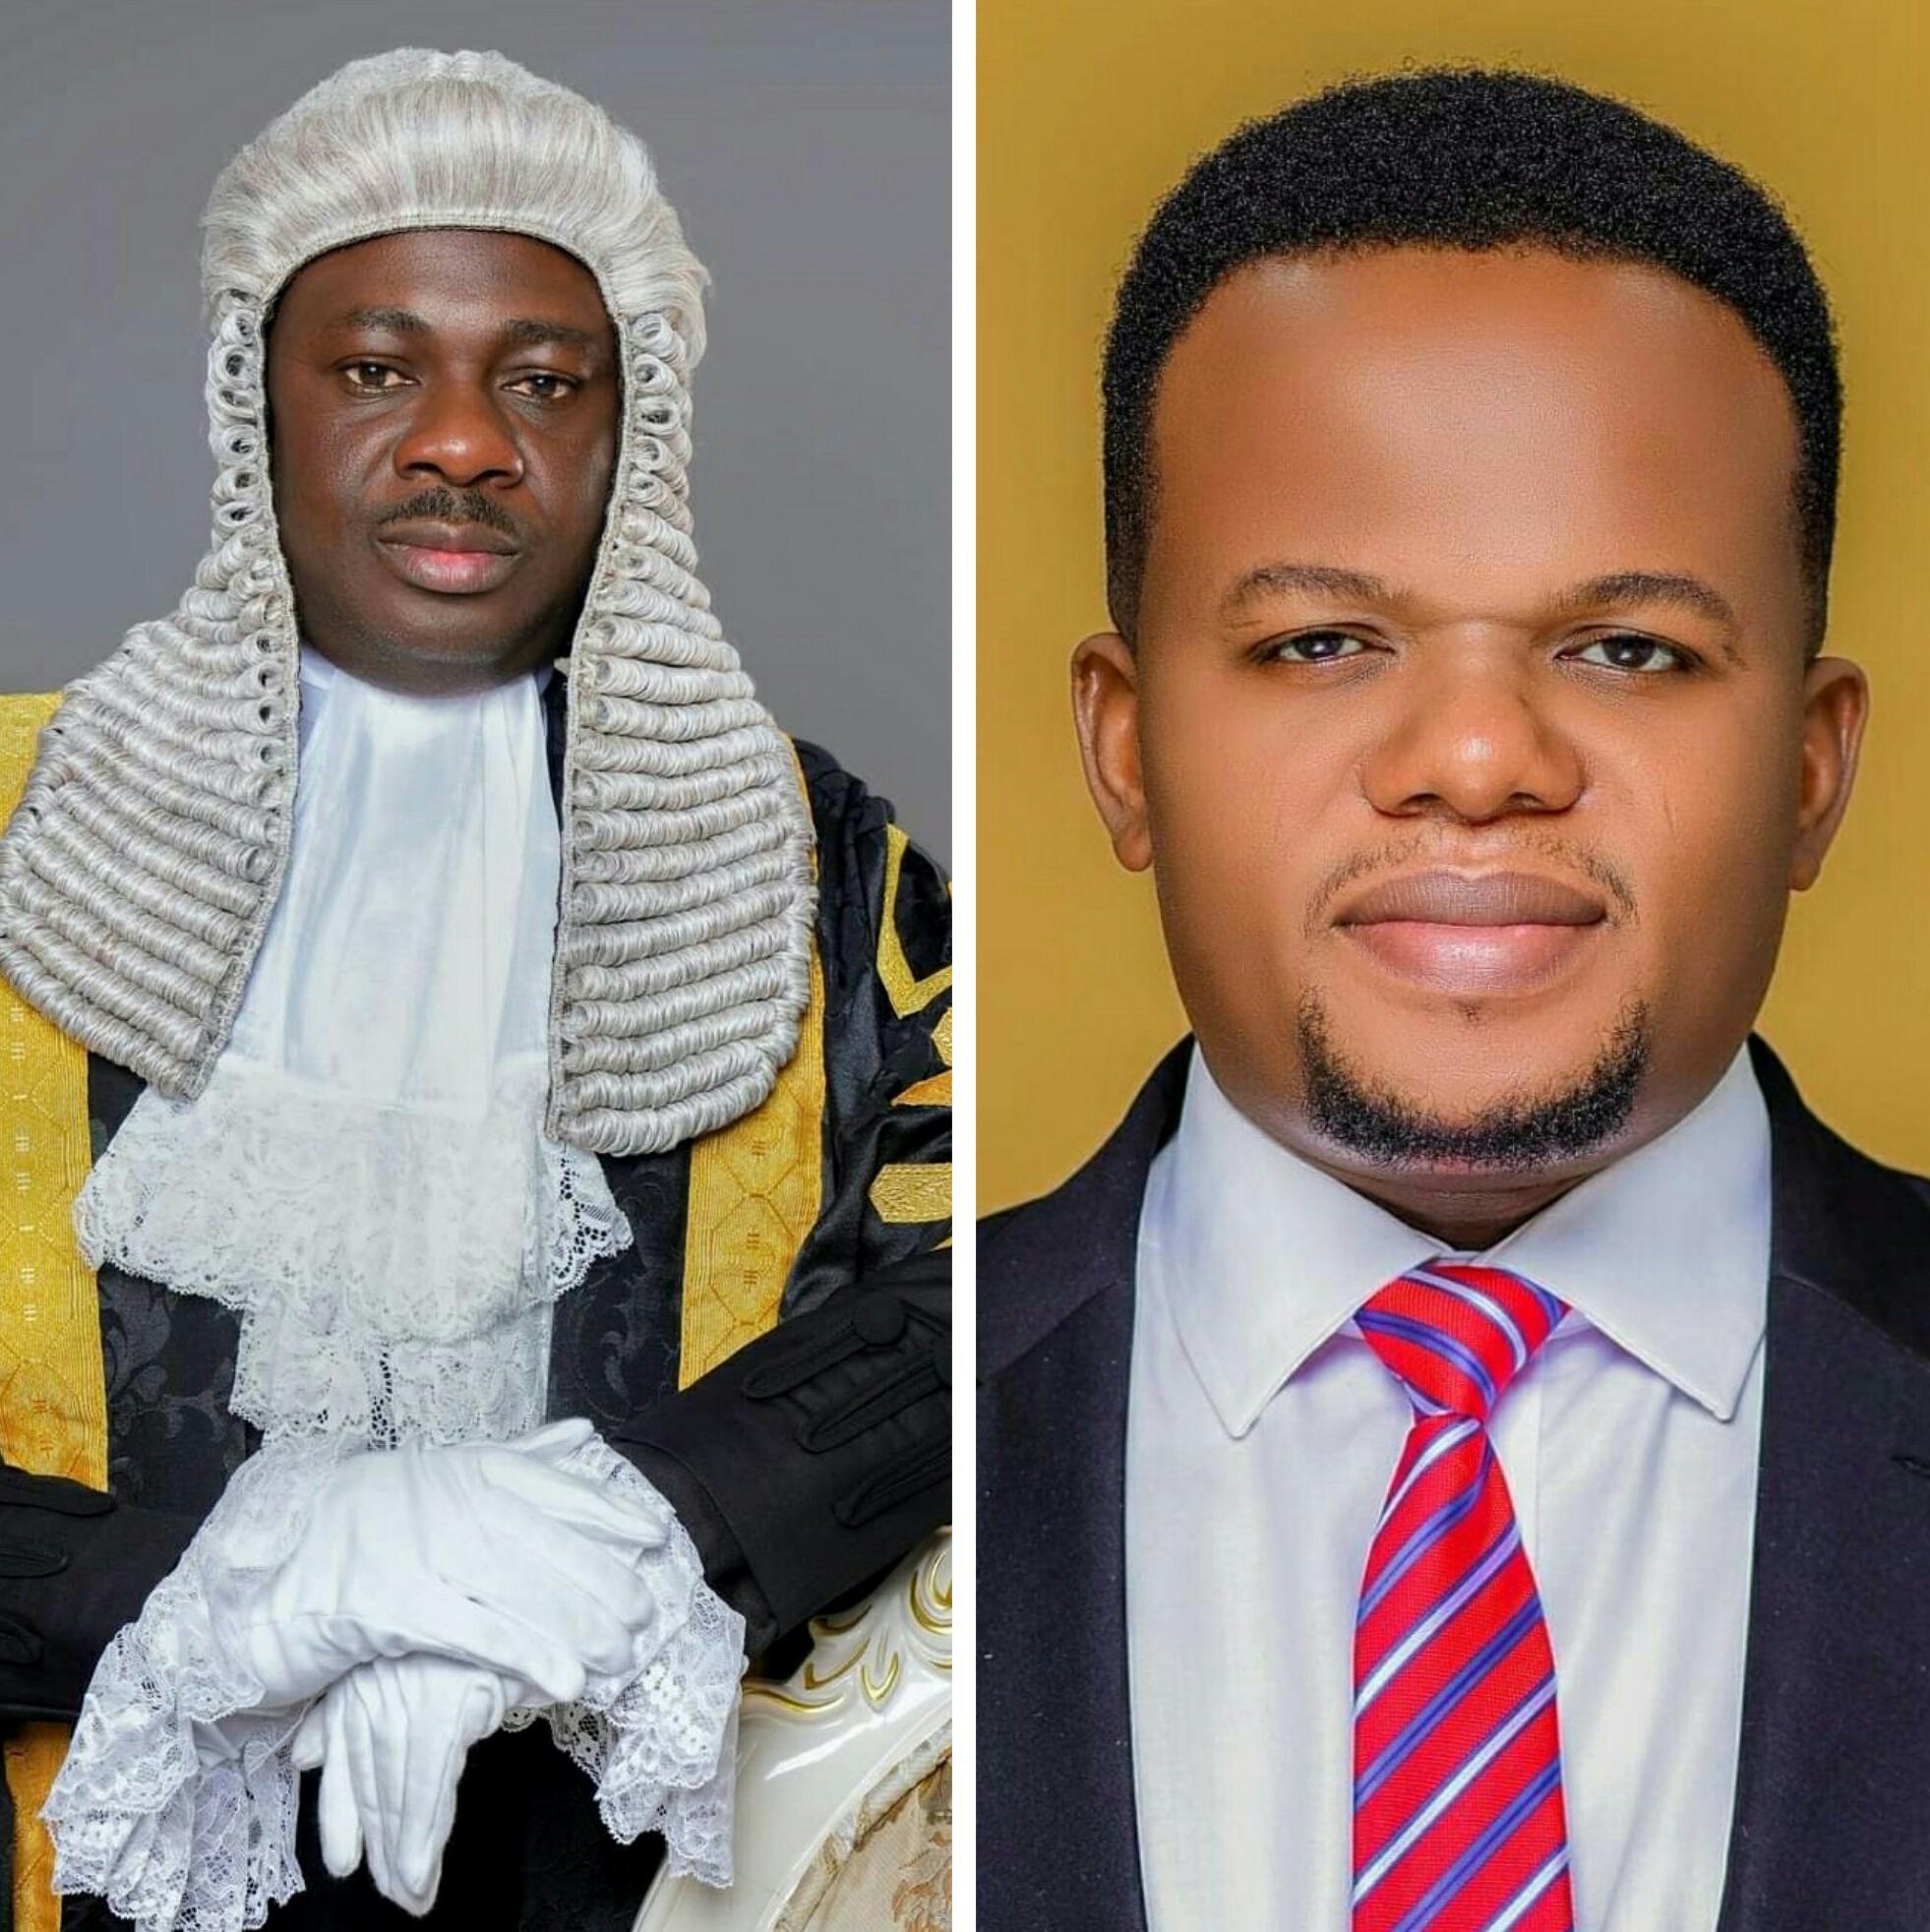 EXCLUSIVE: How Delta Assembly Suspended APC Lawmaker For ‘Protesting His Bill Was Plagiarised And Presented As Executive Bill’